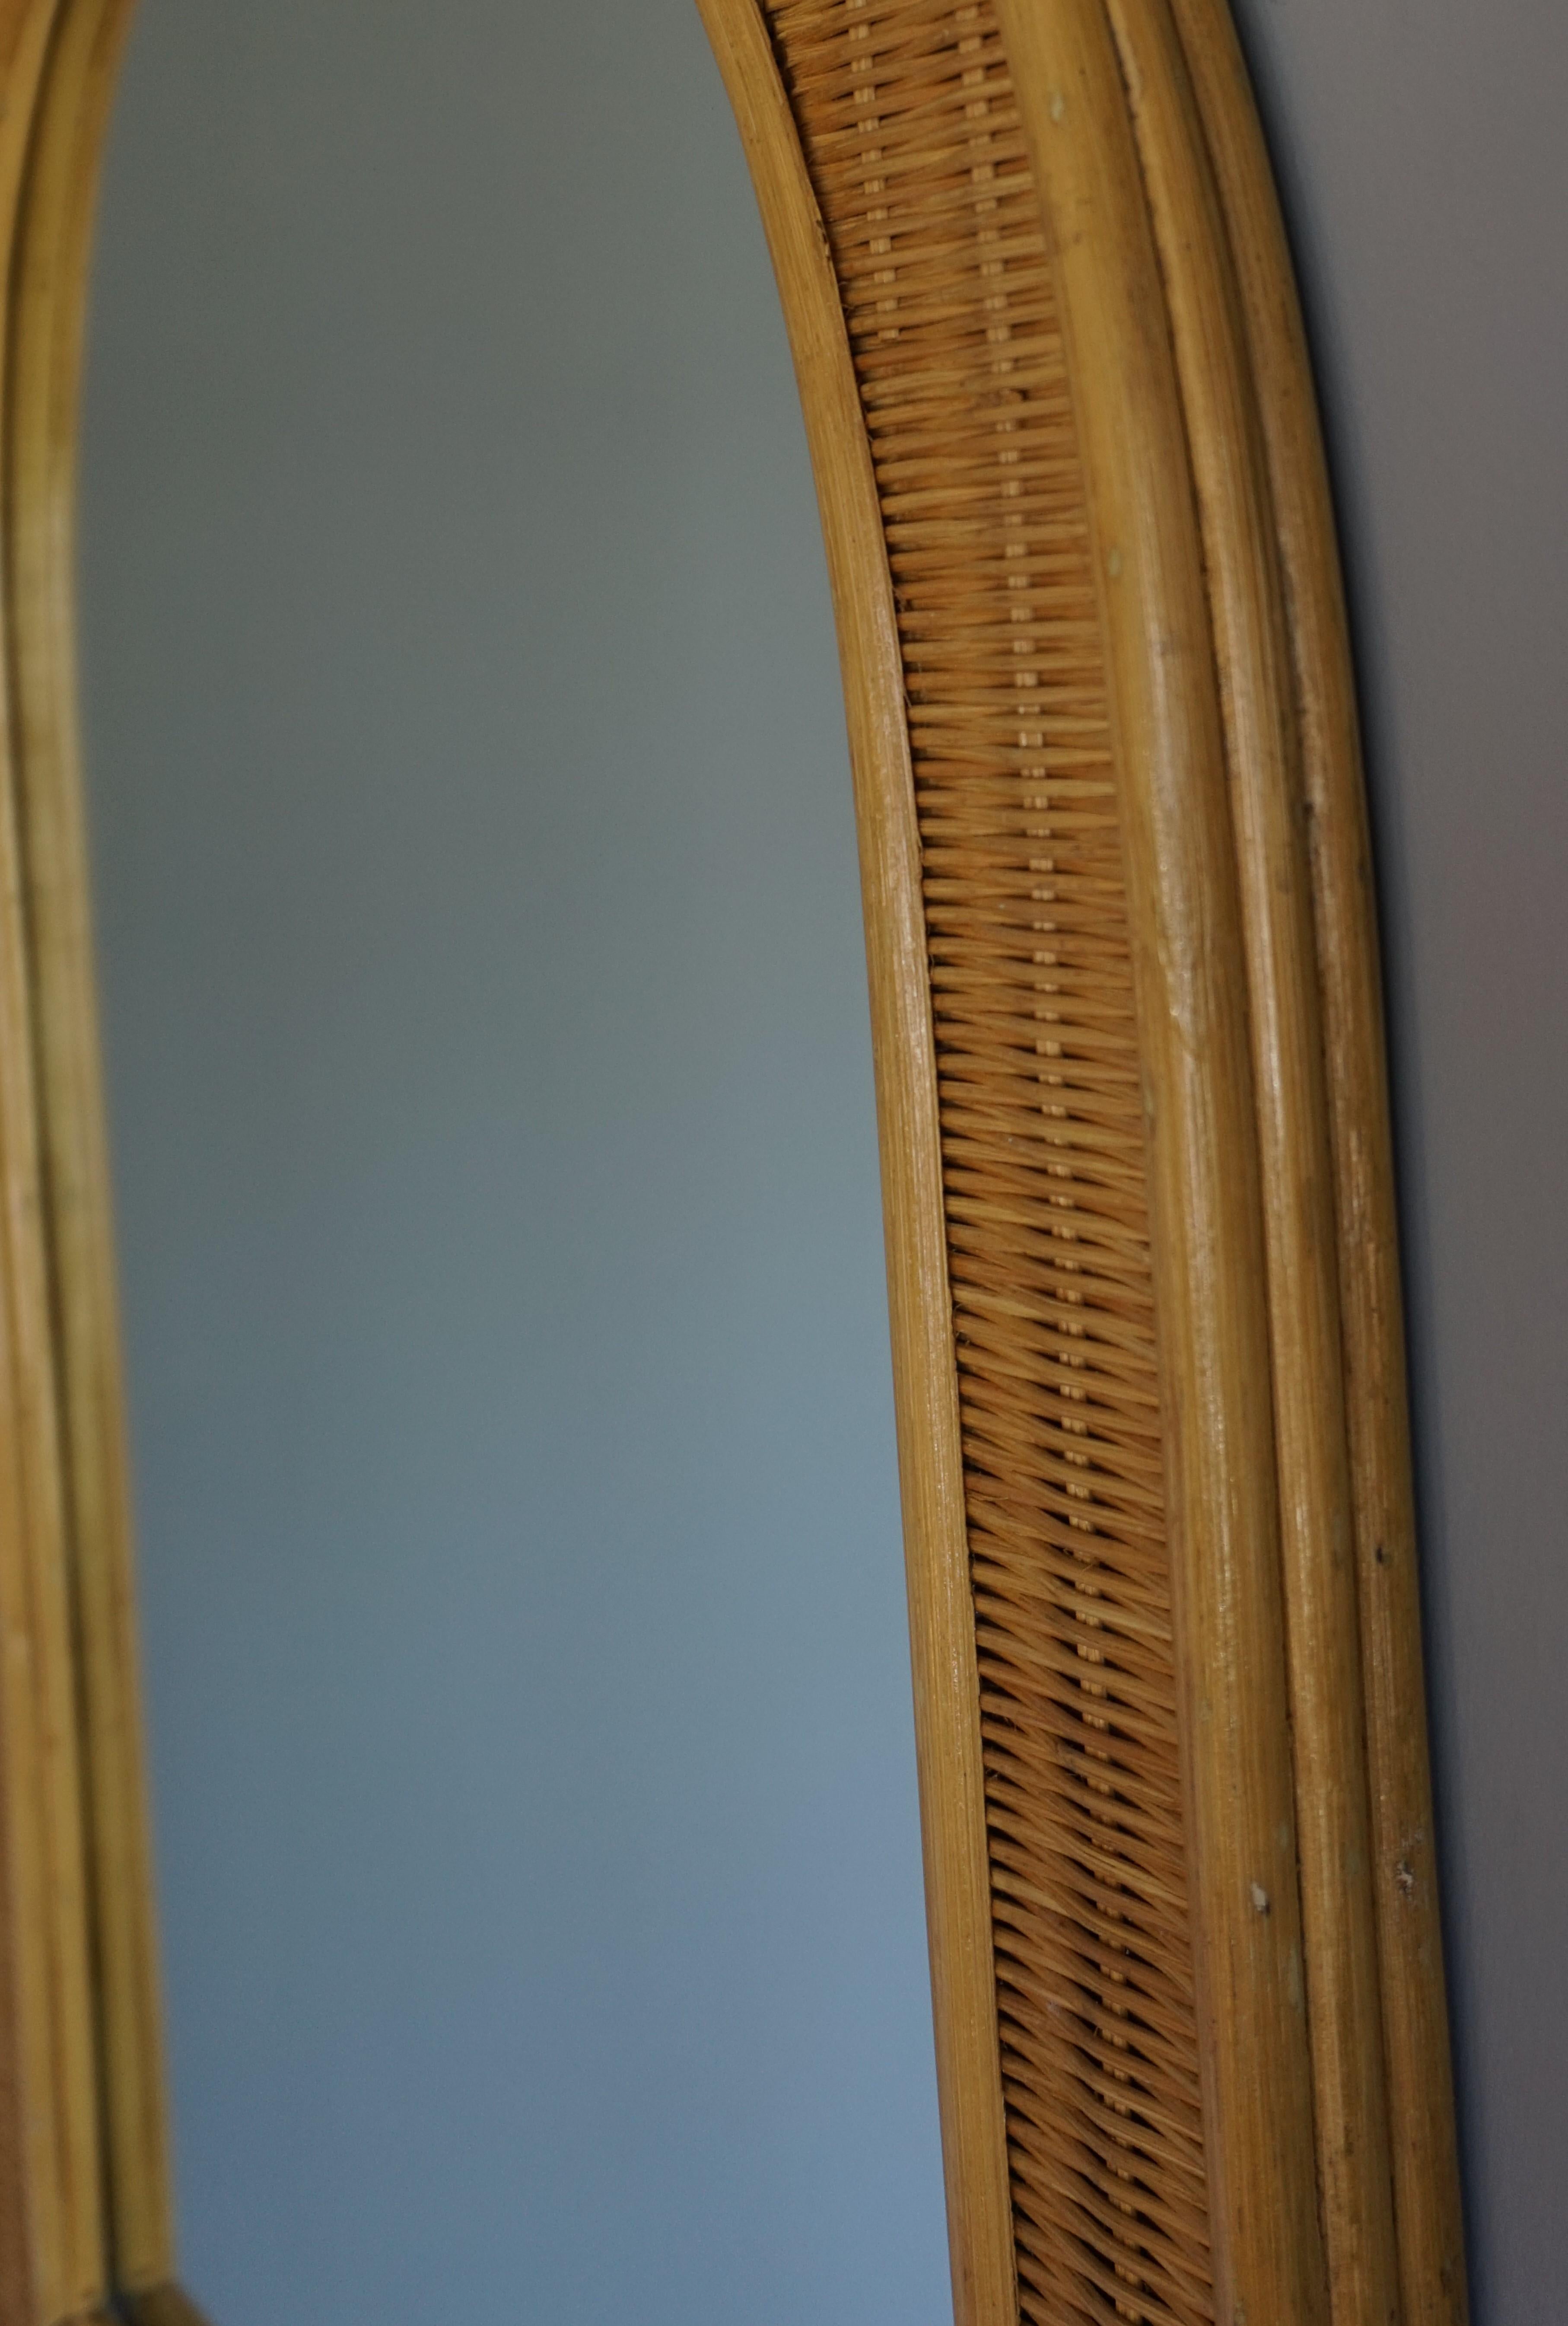 Rare and Handcrafted Midcentury Organic Rattan and Wicker Frame Wall Mirror 1970 For Sale 3